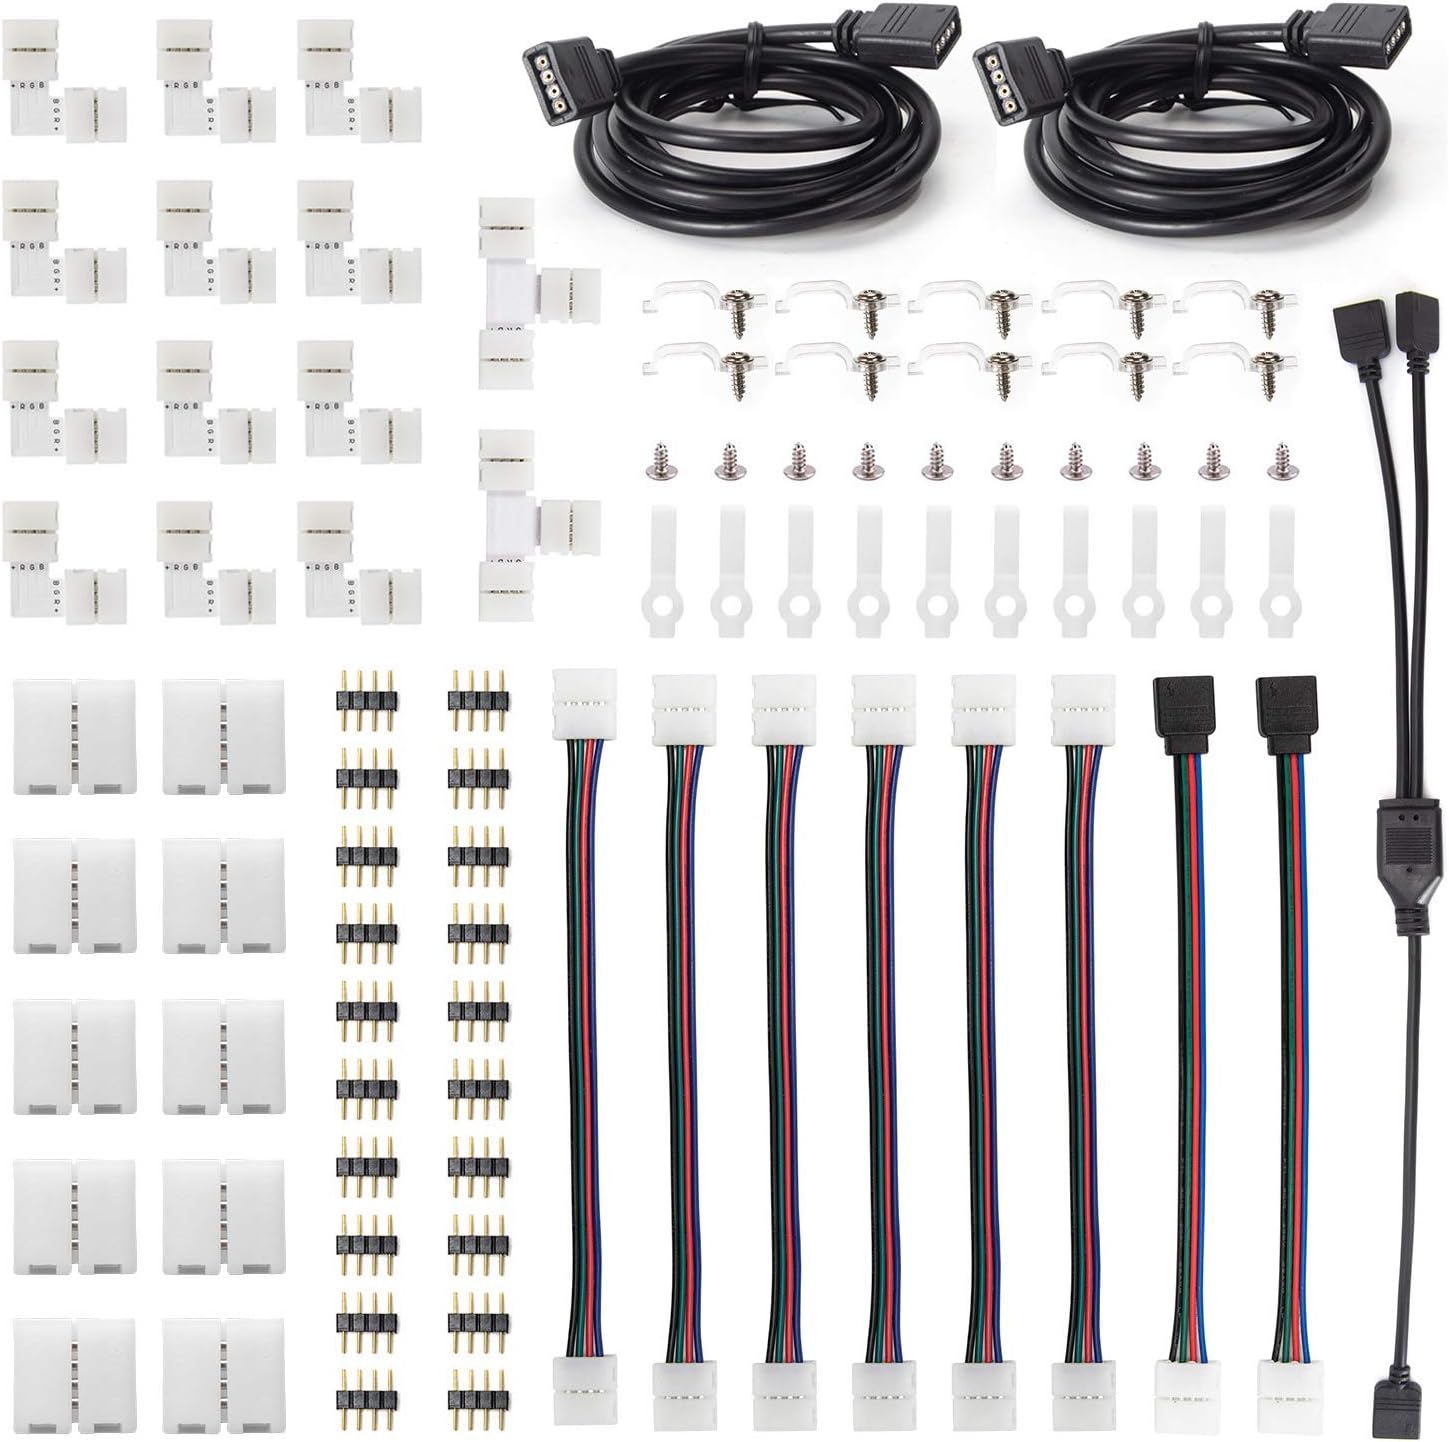 10x led-to-led Connector 4p with 15cm wire for 10mm width RGB 5050 led strip 